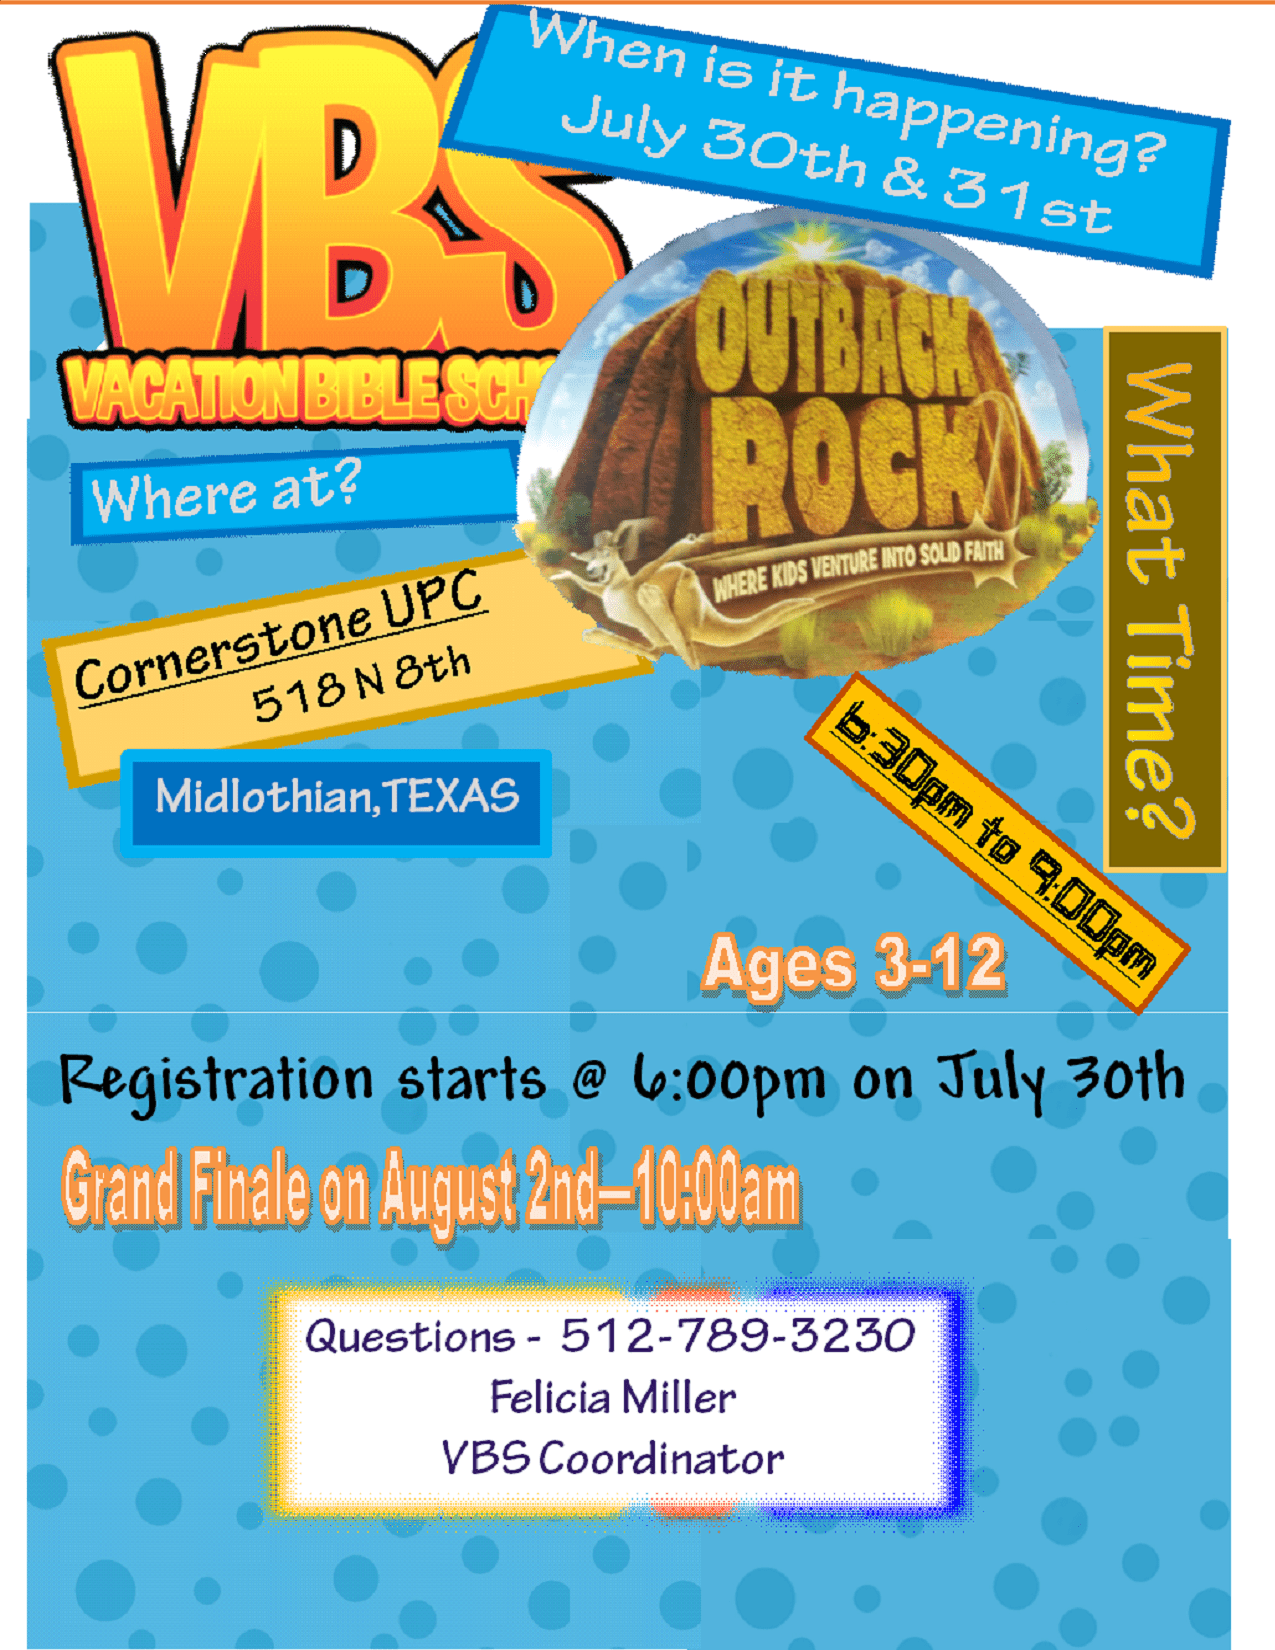 Outback Rock Vbs PNG - 54943